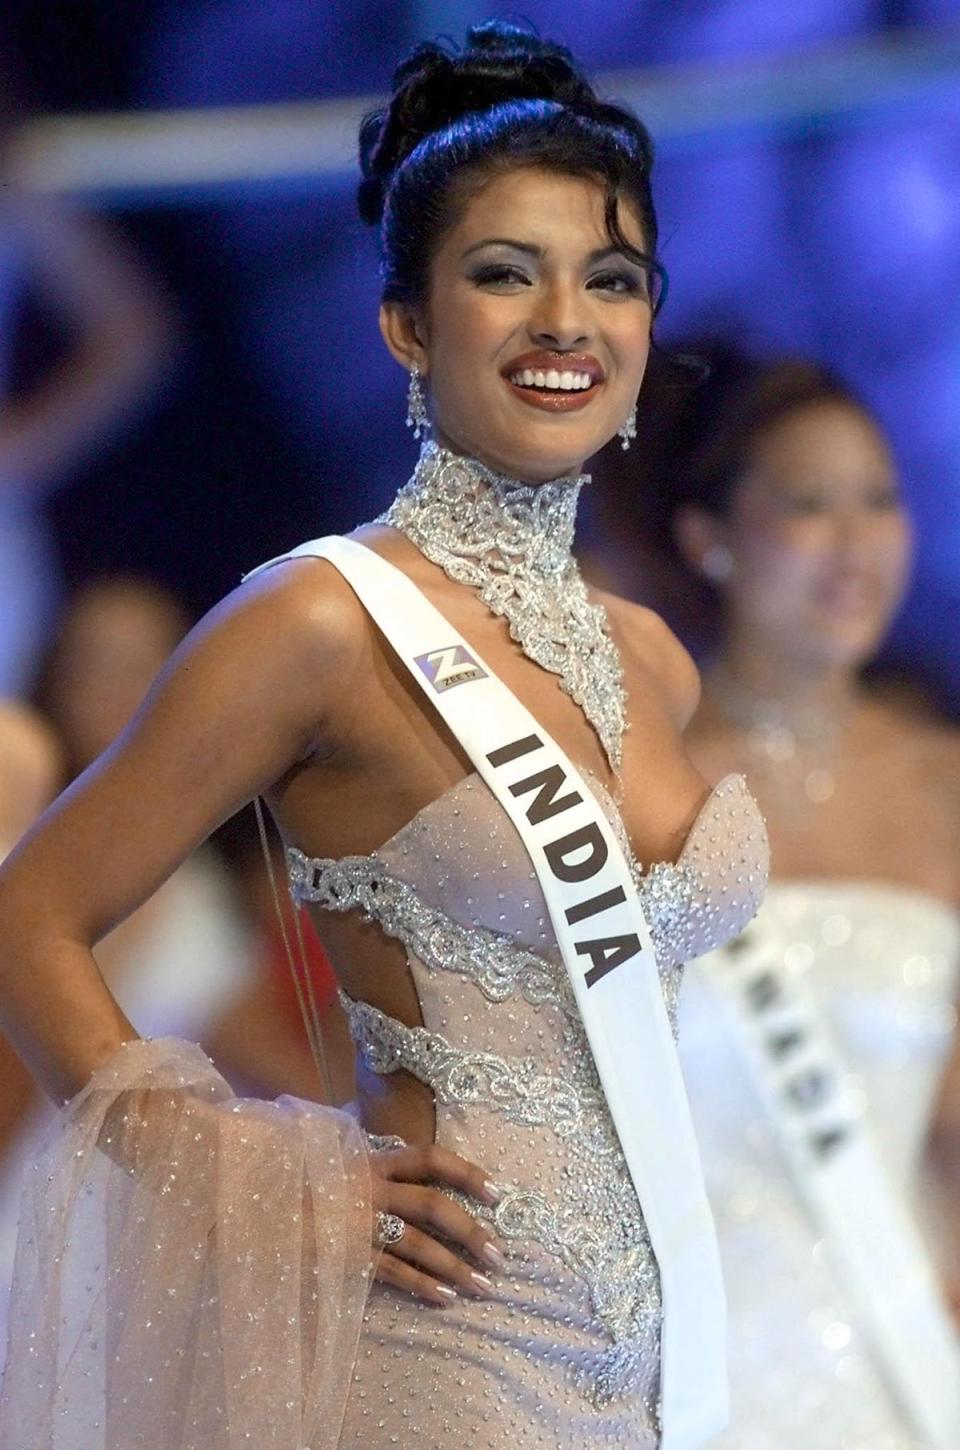 18 year old Priyanka Chopra of India poses on stage during the Miss World final at the Millenium Dome in London, 30 November 2000 (AFP via Getty Images)